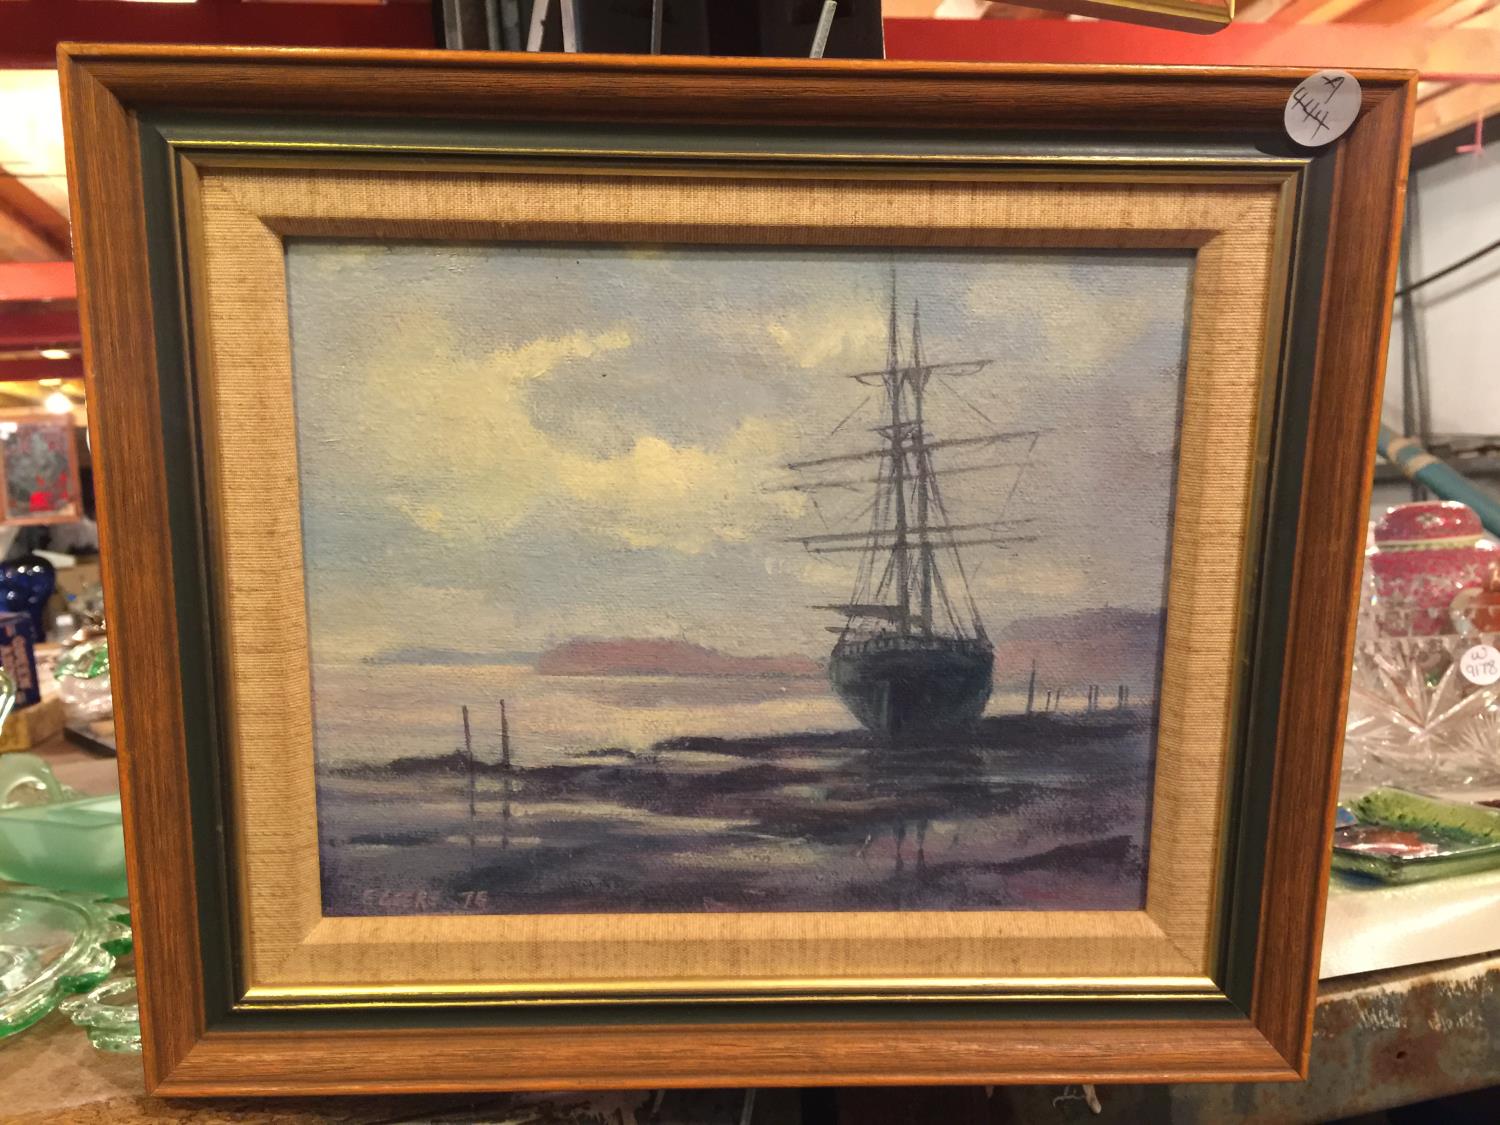 A SMALL FRAMED PAINTING ON BOARD OF A LARGE SHIP AND A SECOND FRAMED PRINT - Image 2 of 3